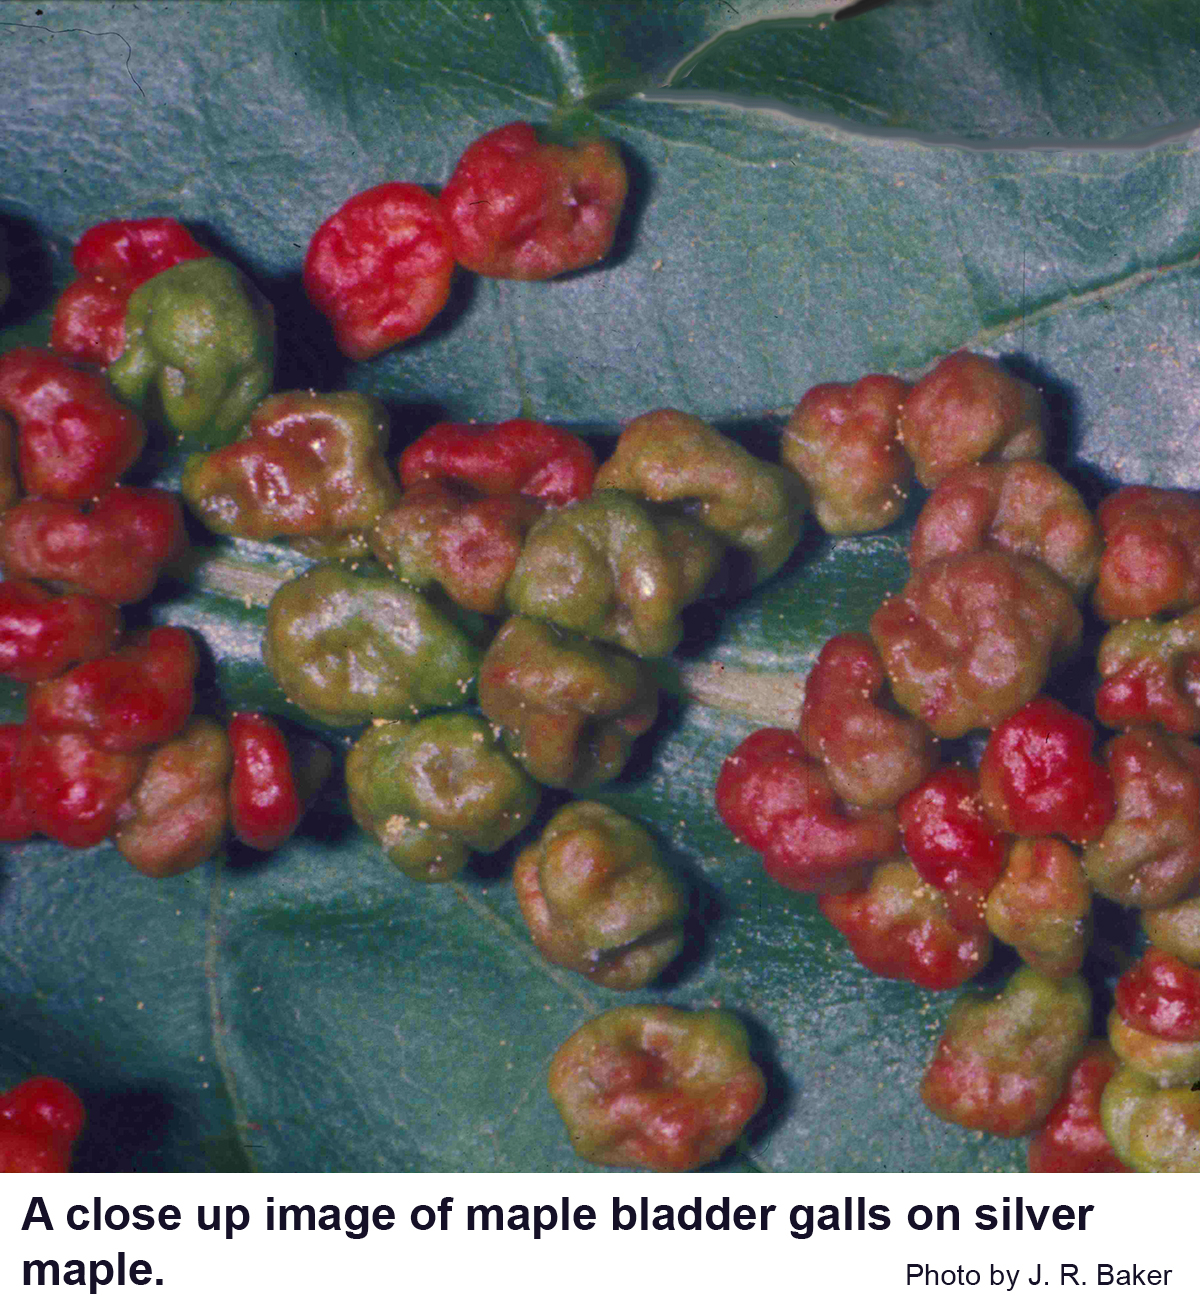 Close up image of maple bladder galls on silver maple.